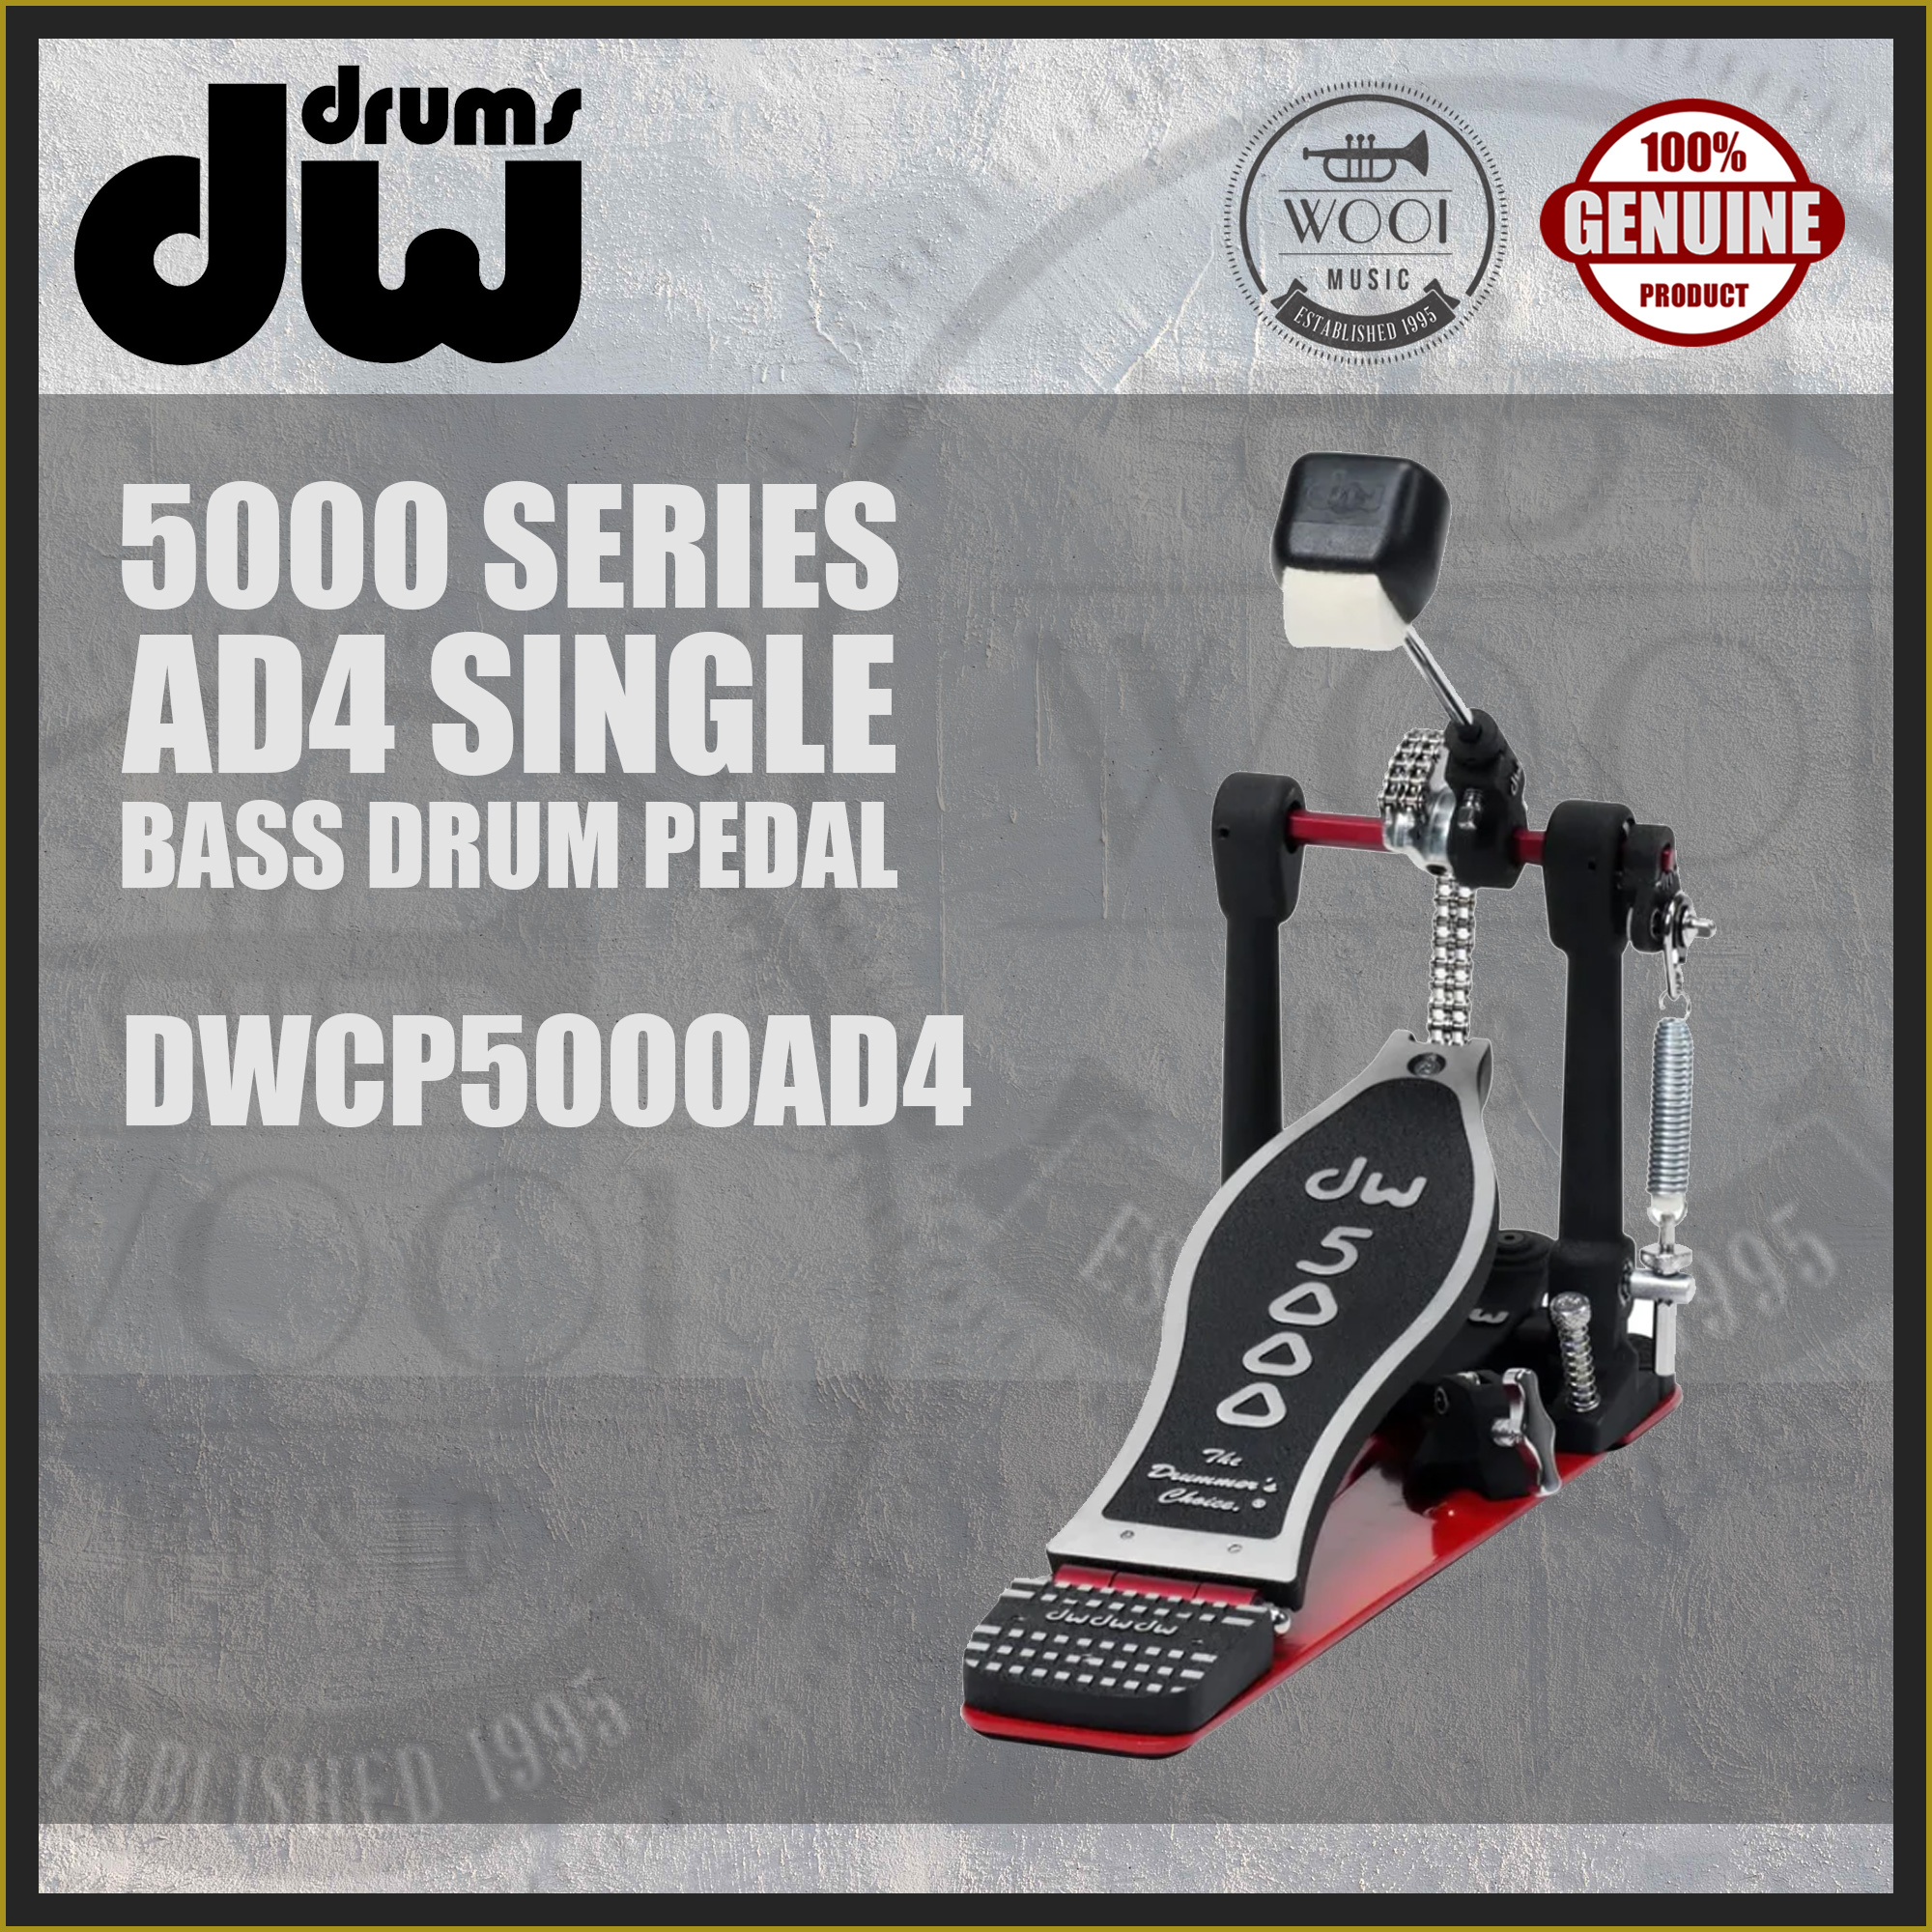 DW Drums 5000 Series AD4 Single Bass Drum Pedal - DWCP5000AD4